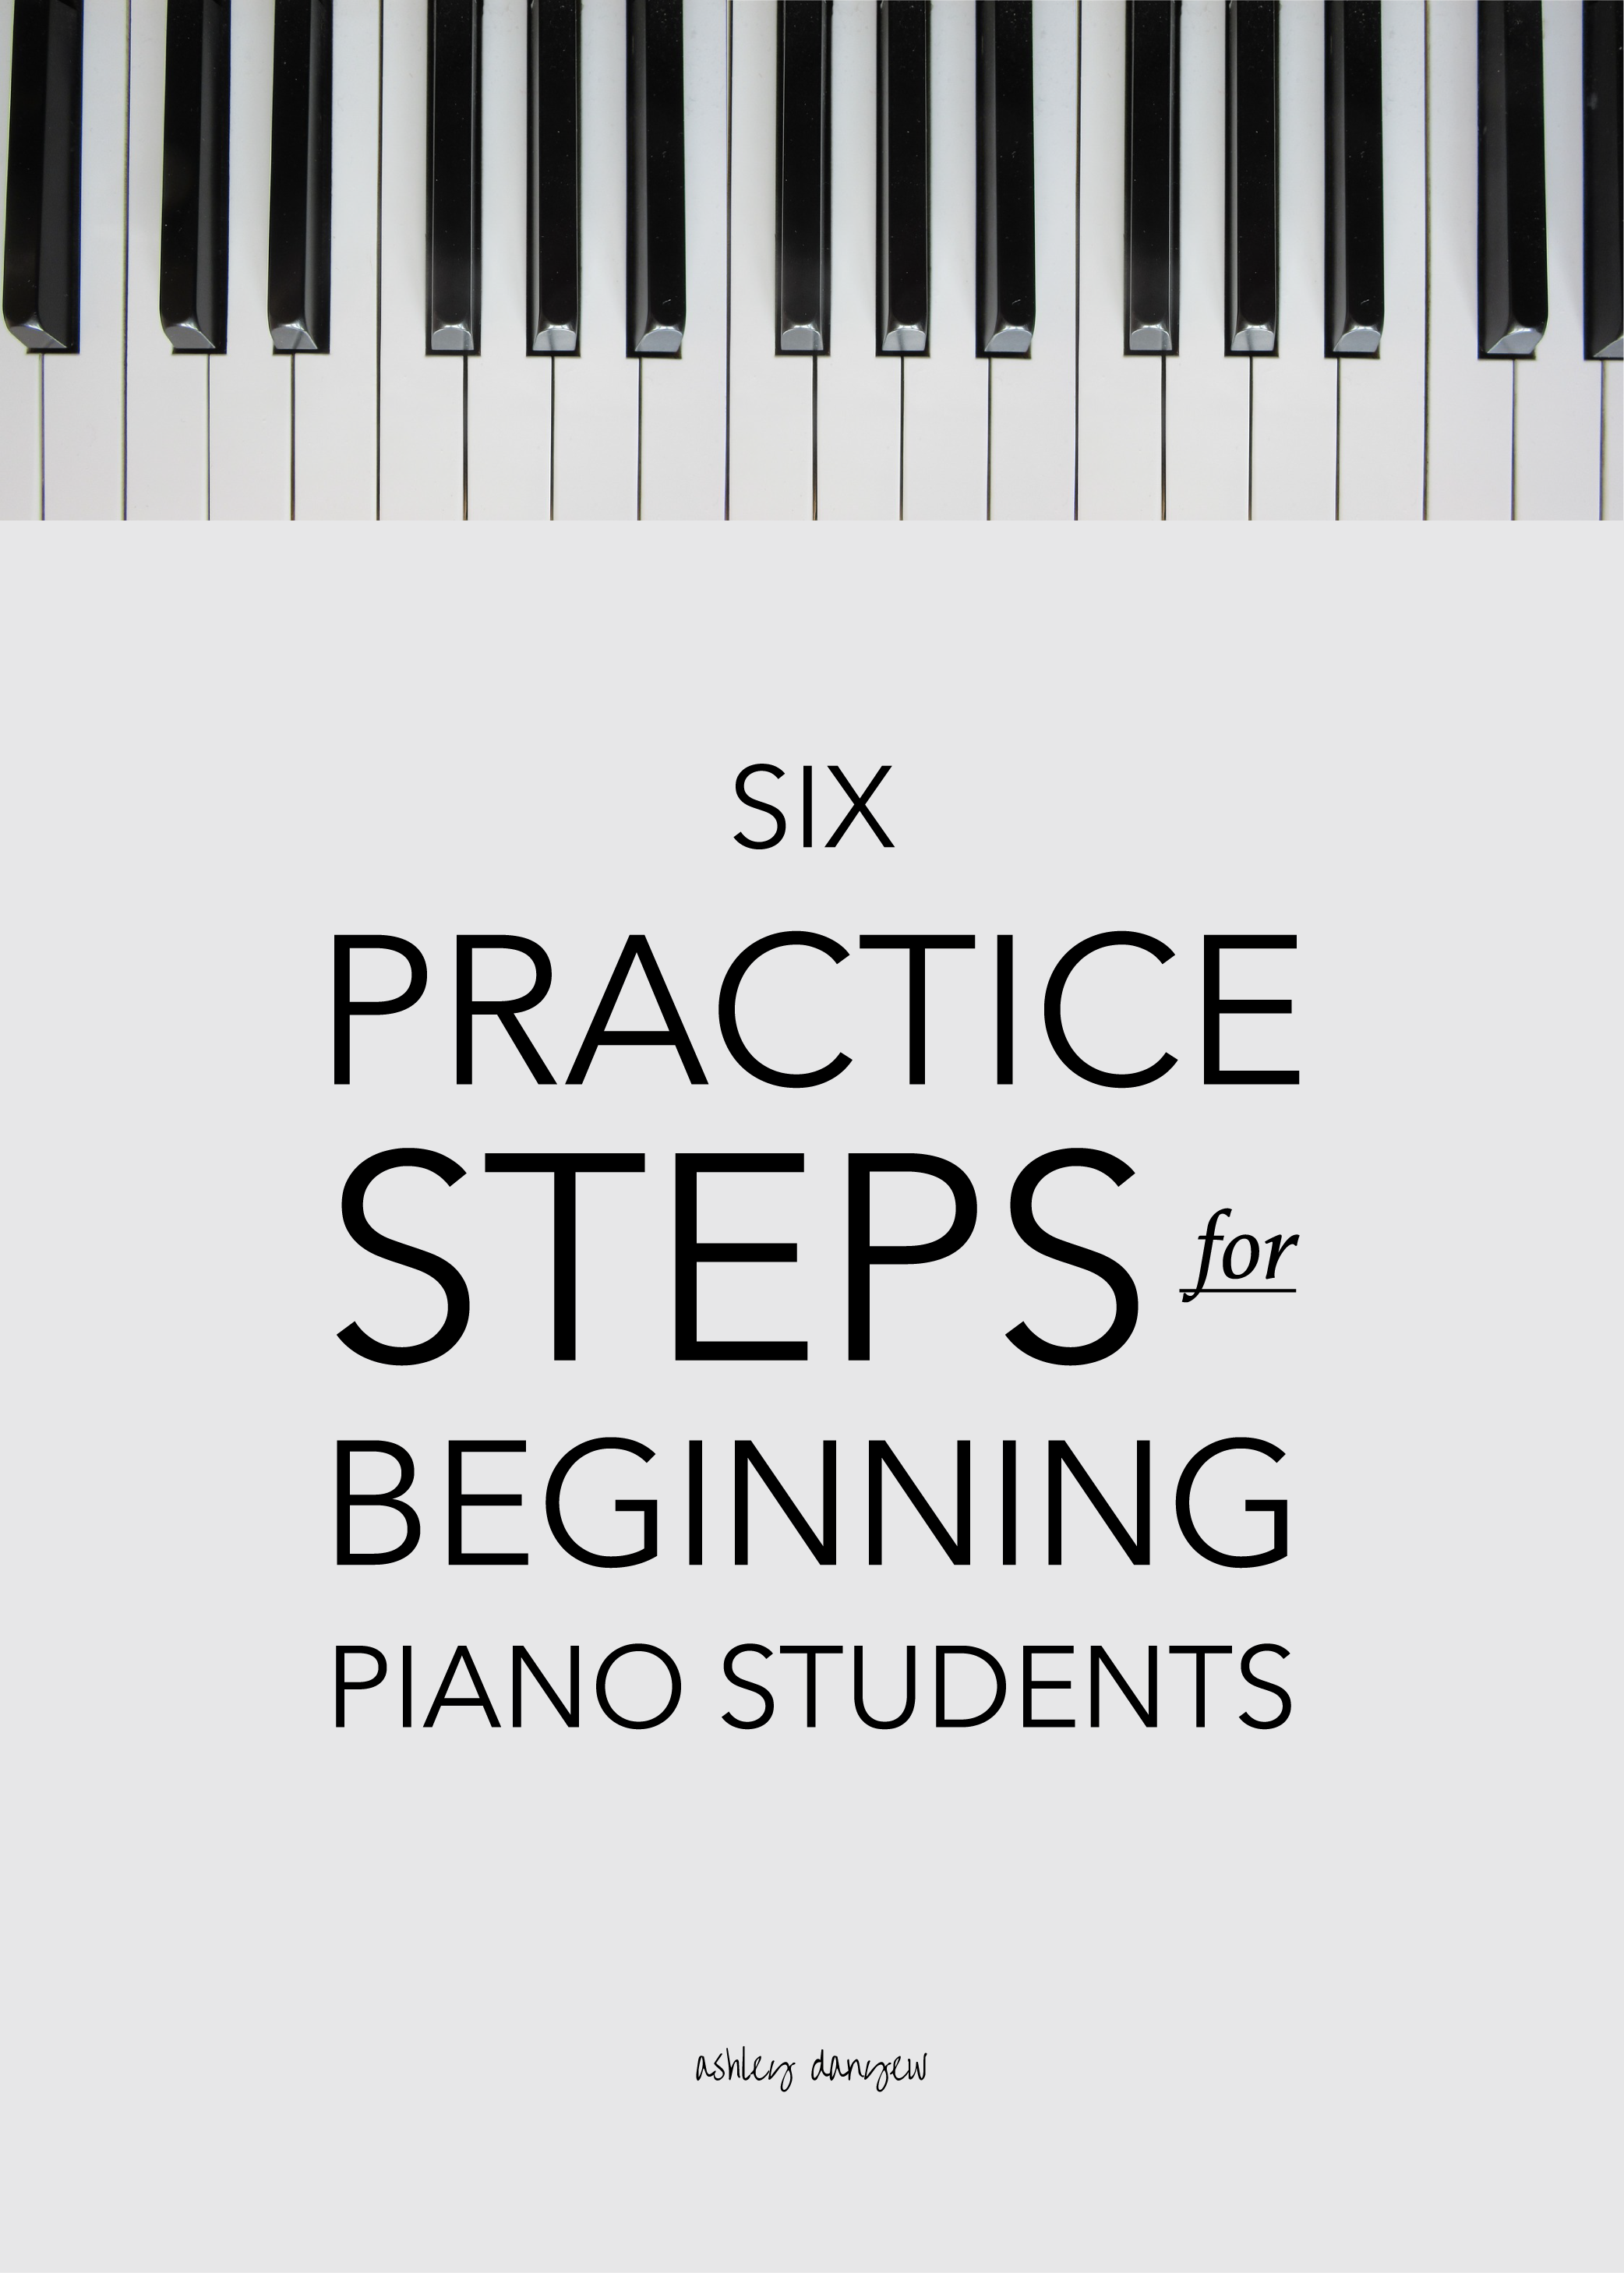 Six Practice Steps for Beginning Piano Students